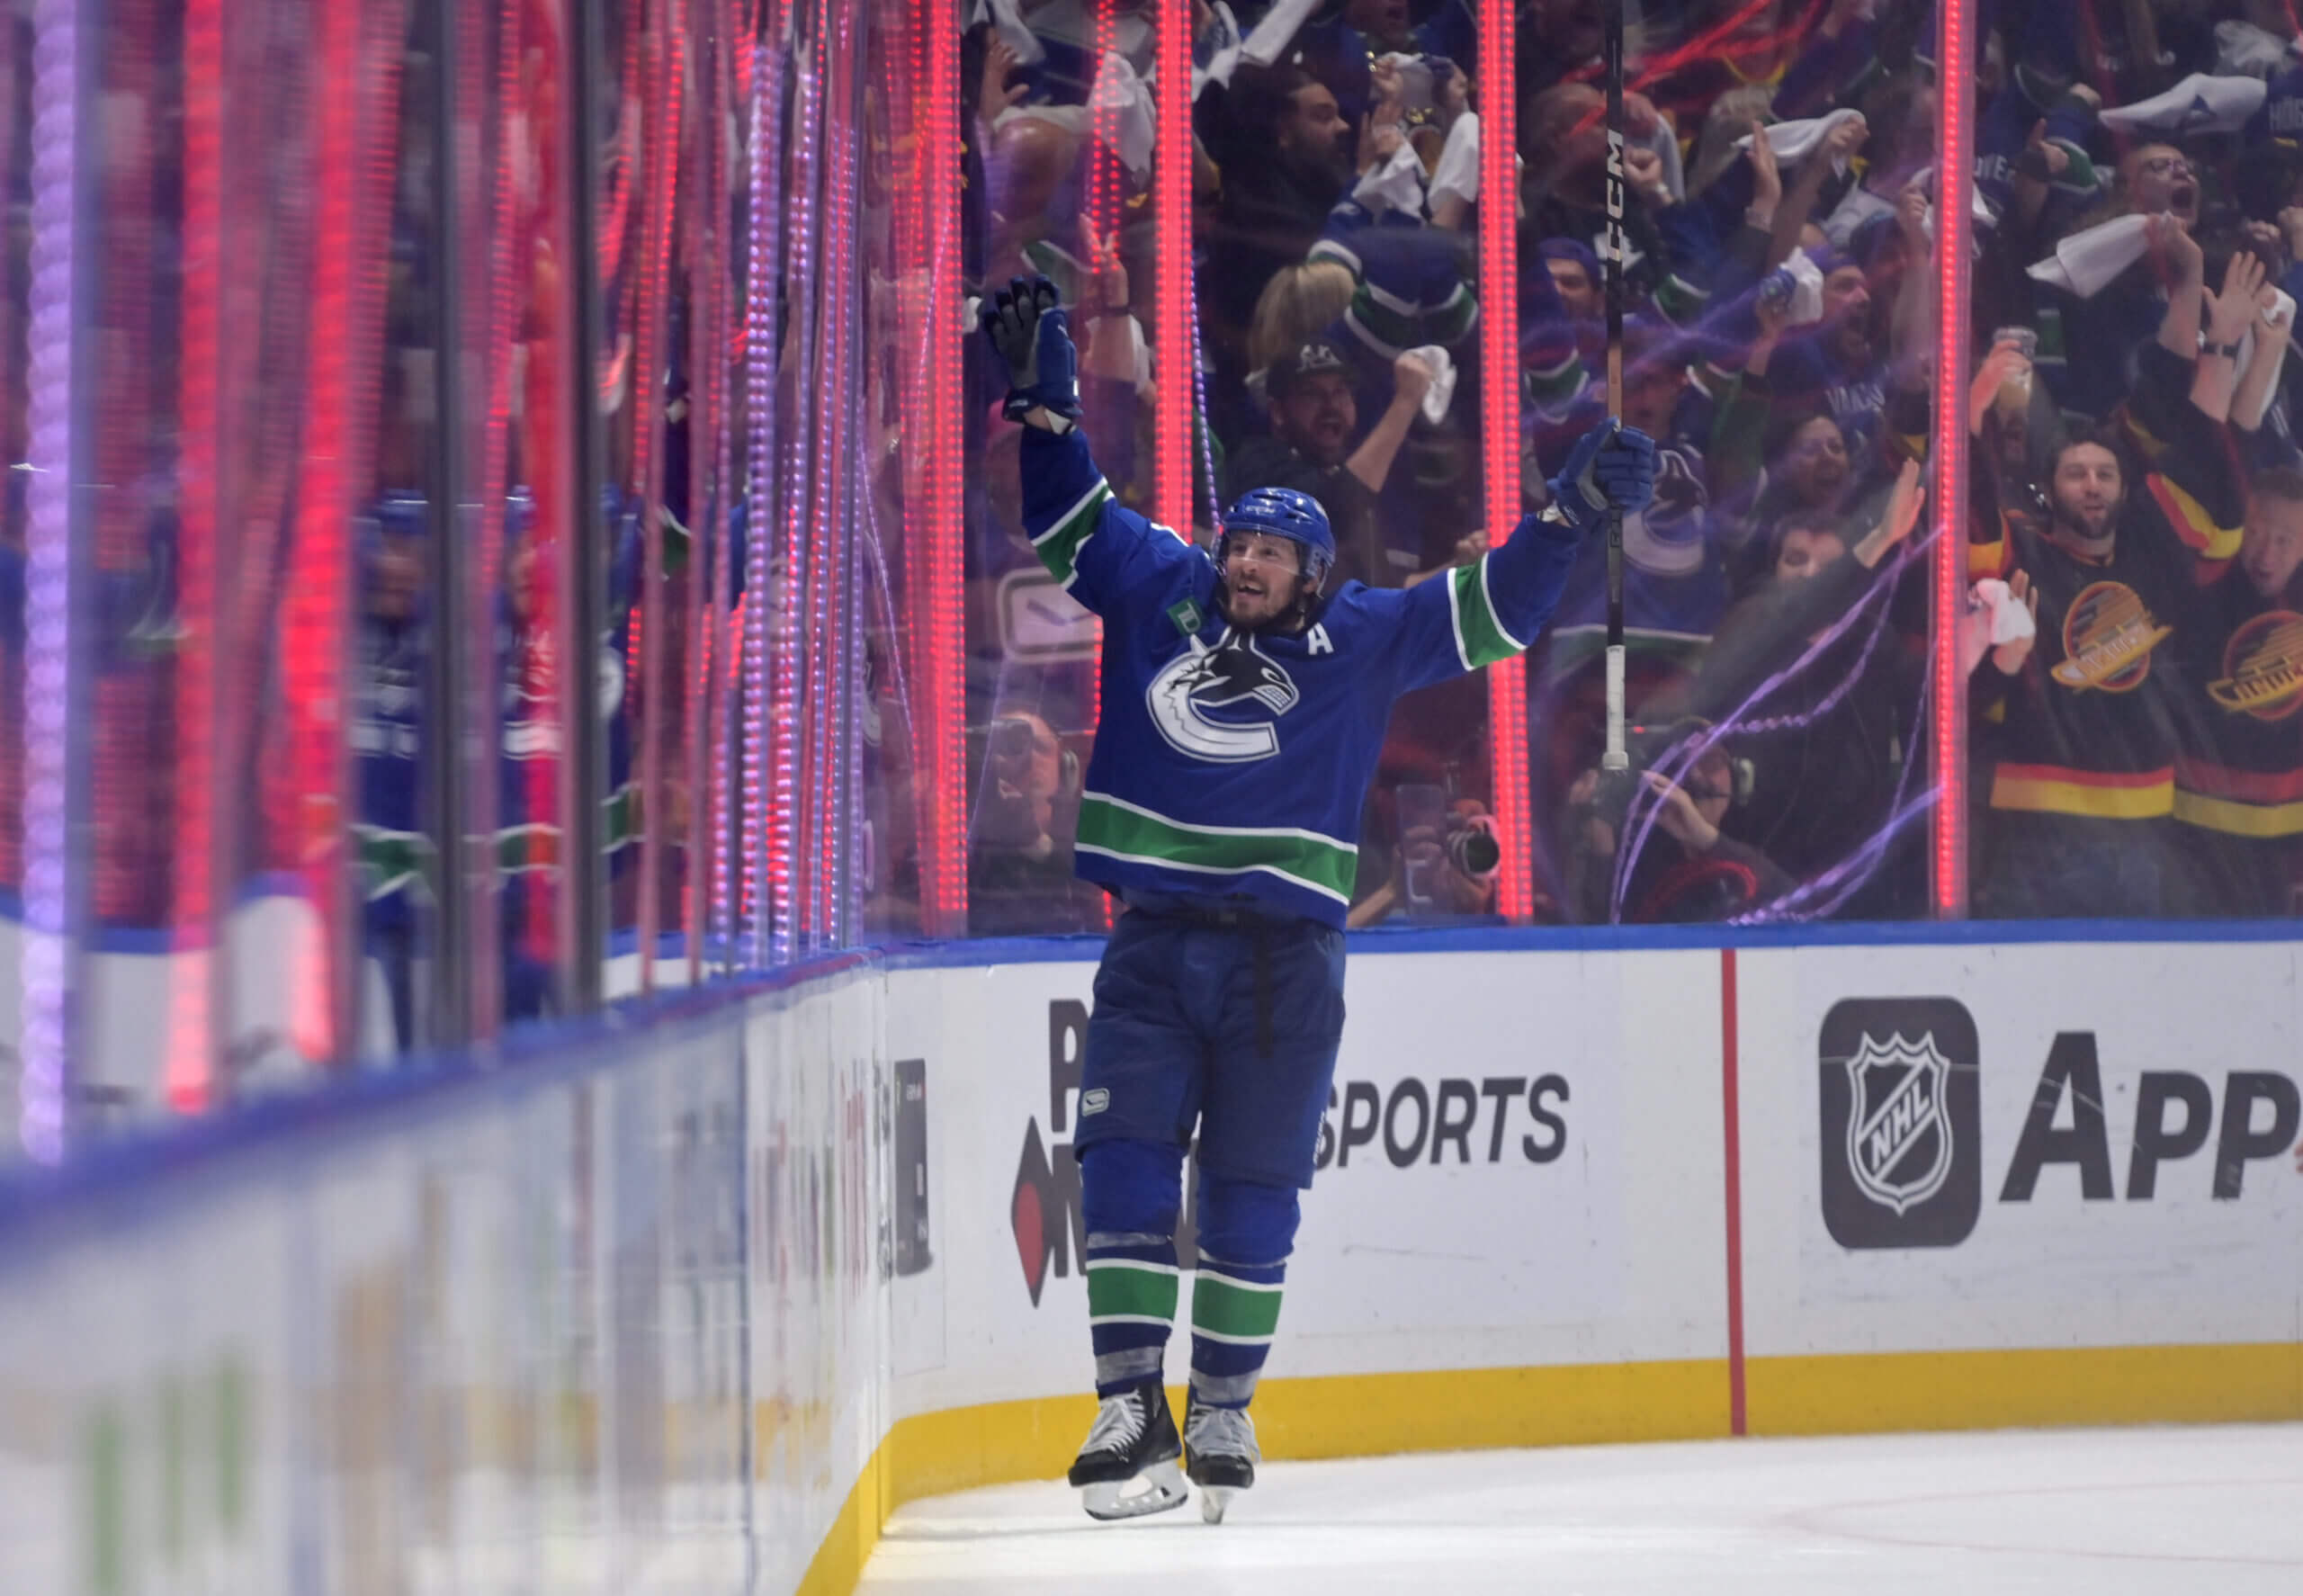 Baby legs, J.T. Miller and the unforgettable scenes from Canucks' Game 5 victory